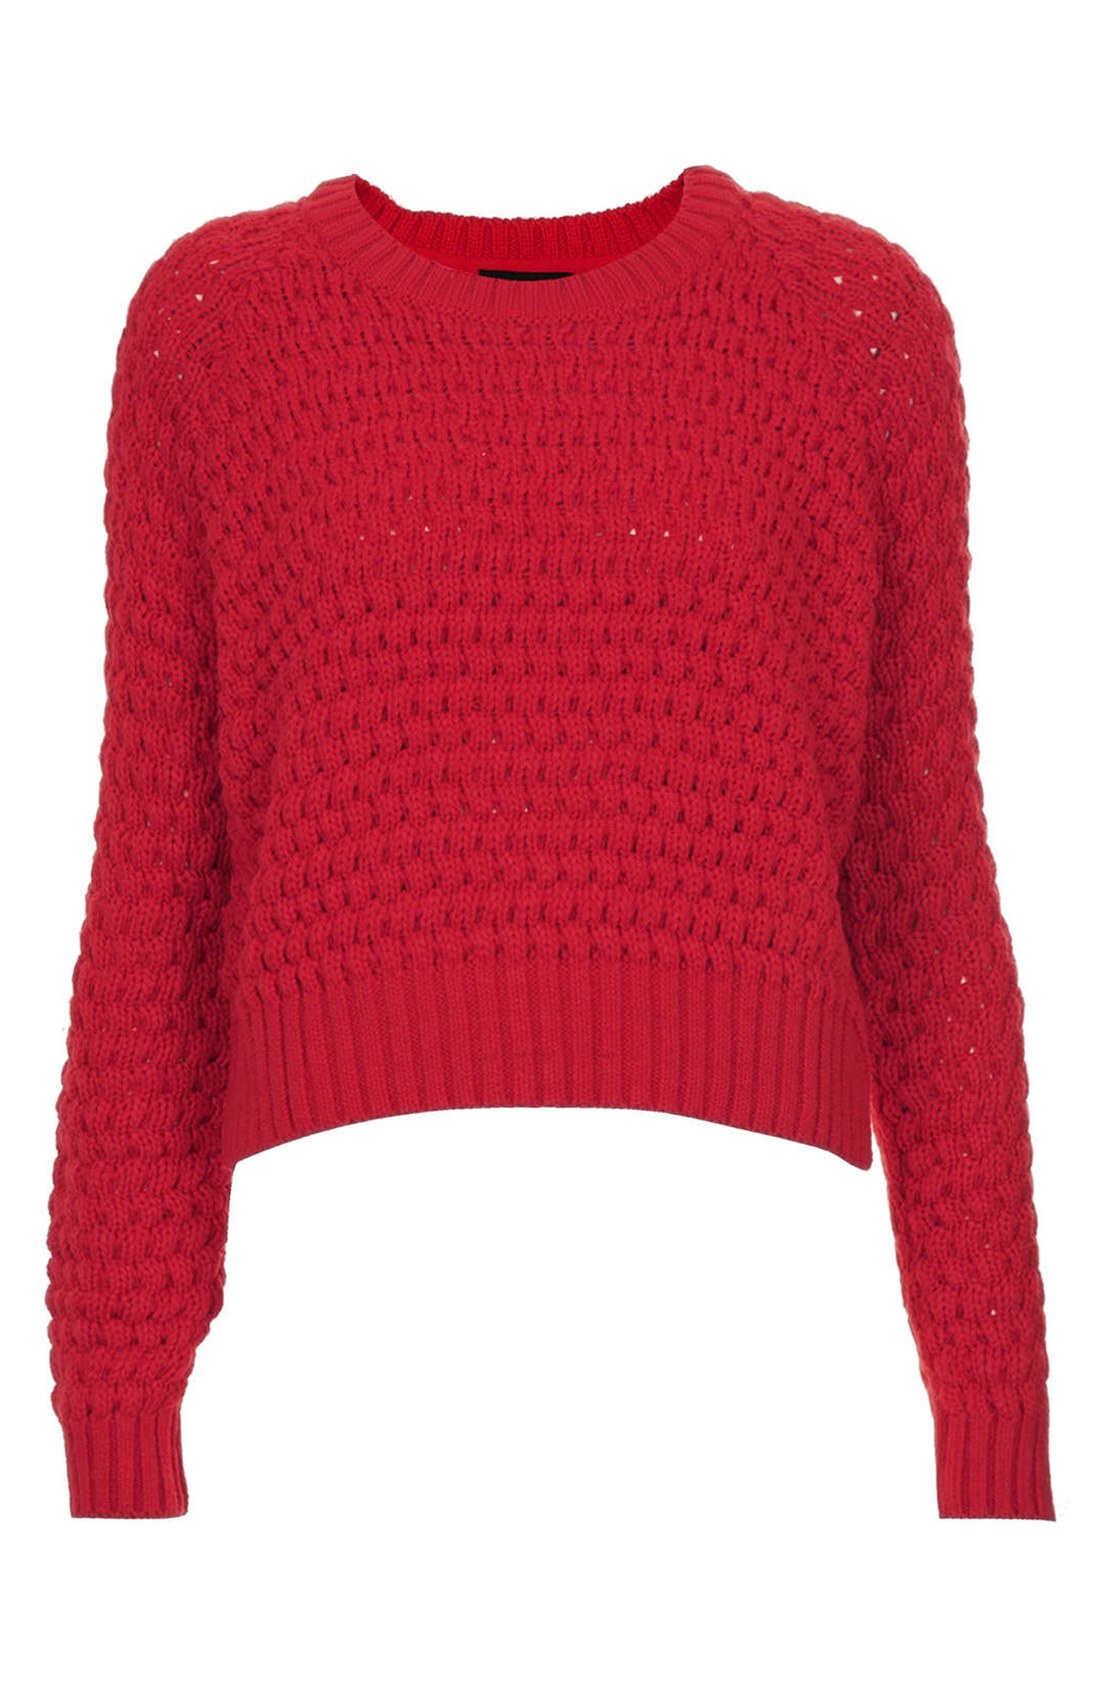 Topshop Knit Sweater in Red | Lyst